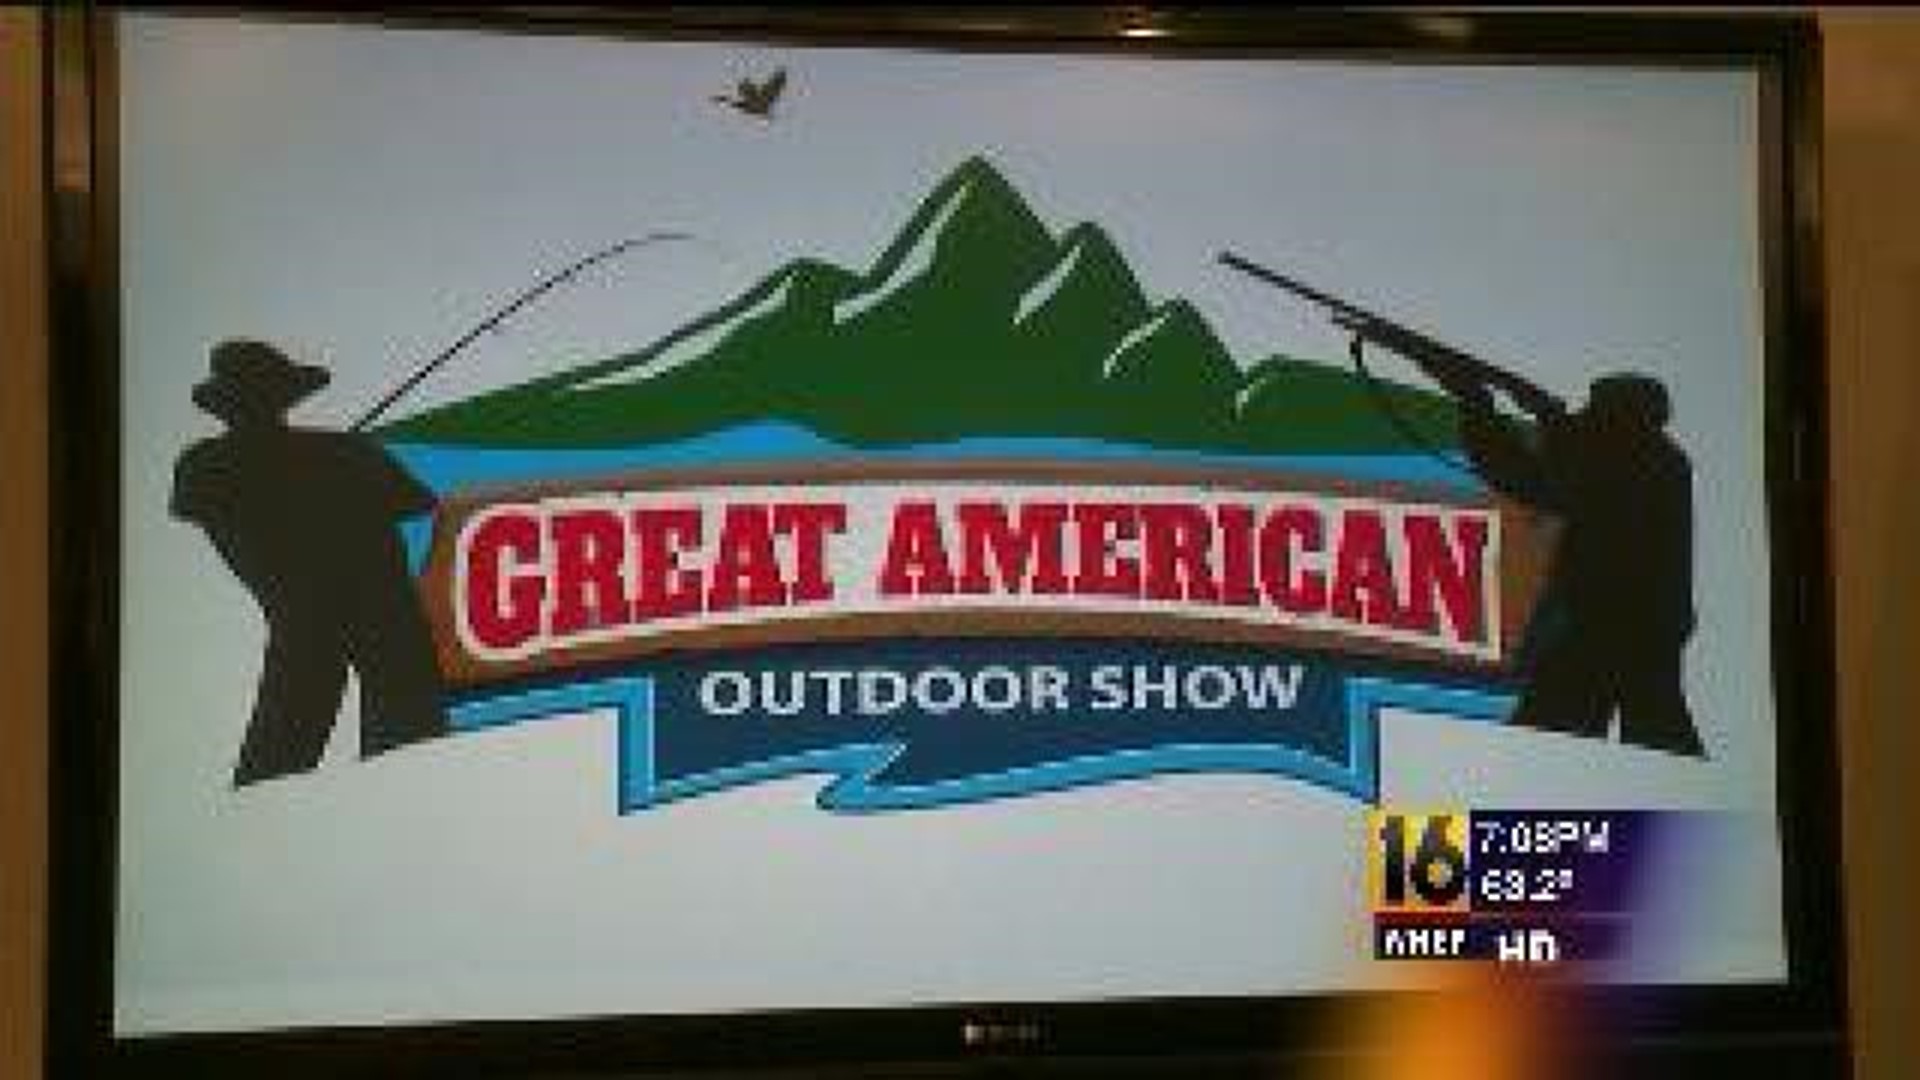 NRA to Produce Outdoor Show in Harrisburg